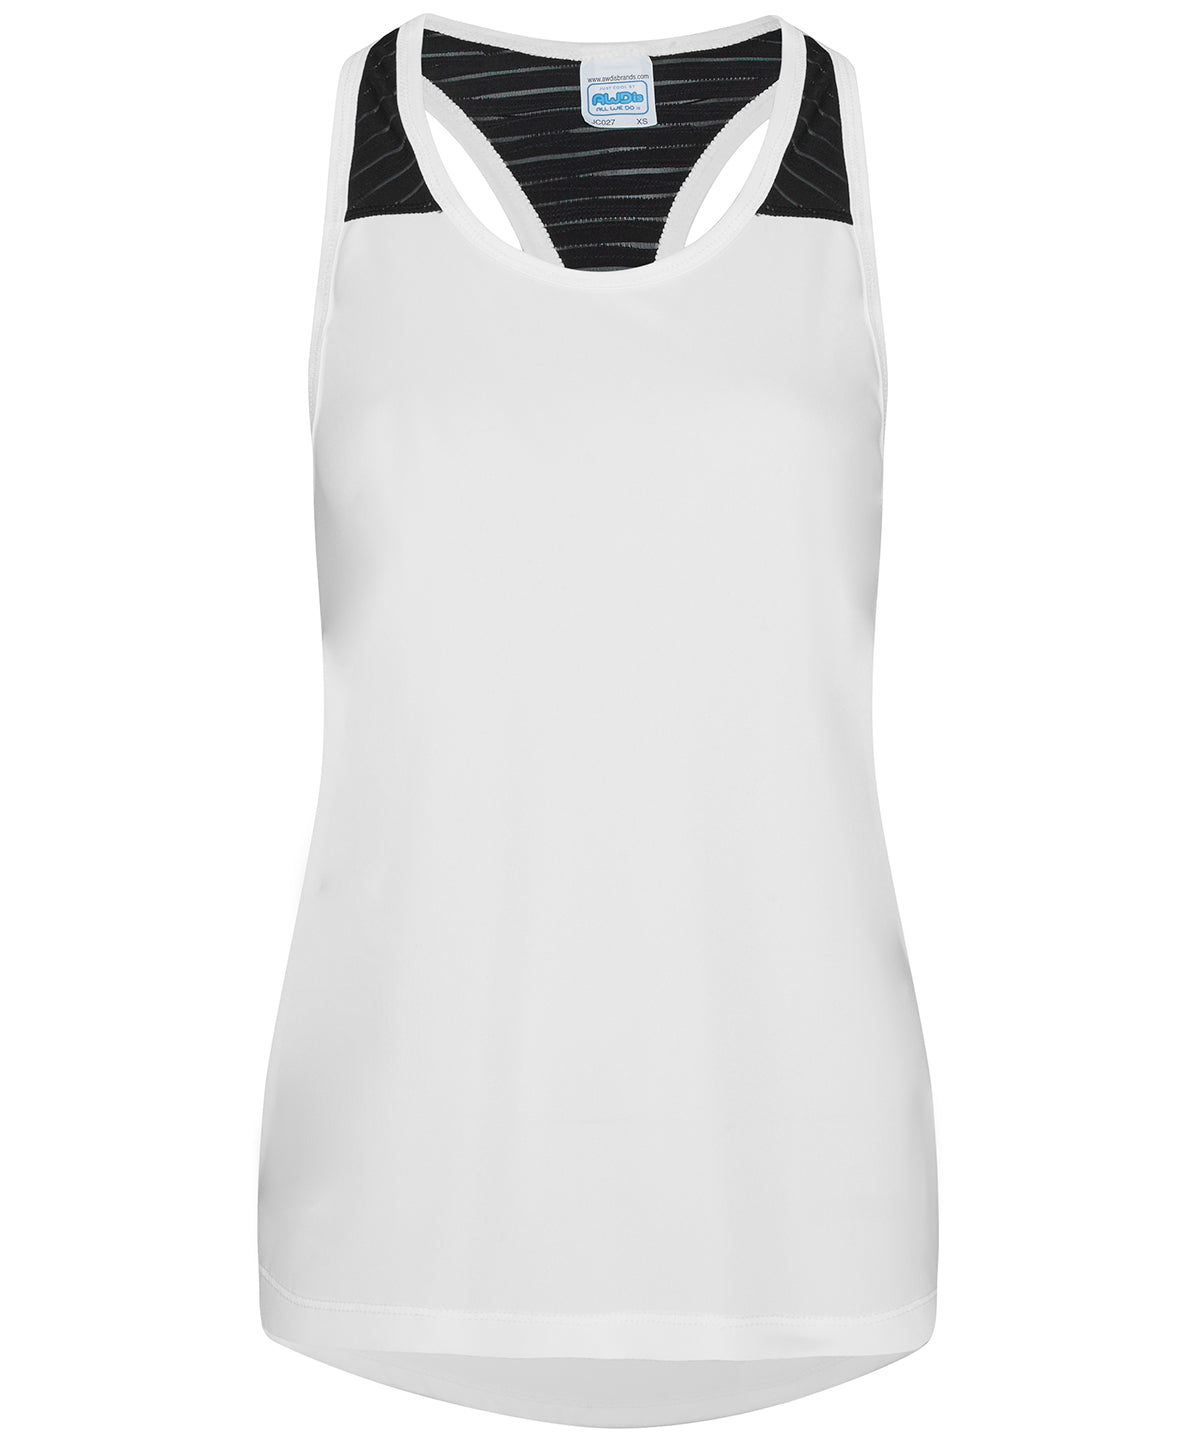 Personalised Vests - White AWDis Just Cool Women's cool smooth workout vest